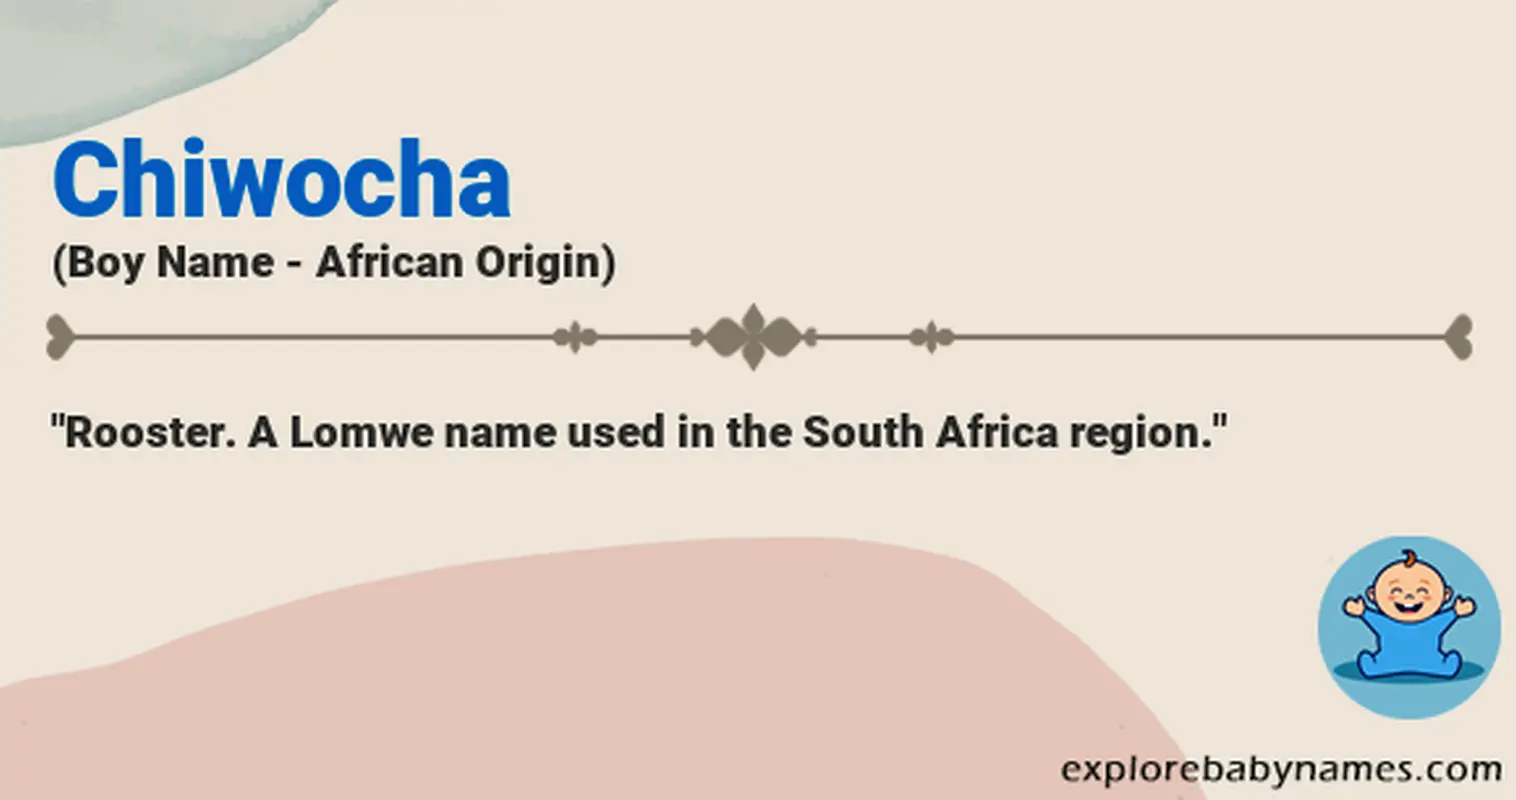 Meaning of Chiwocha